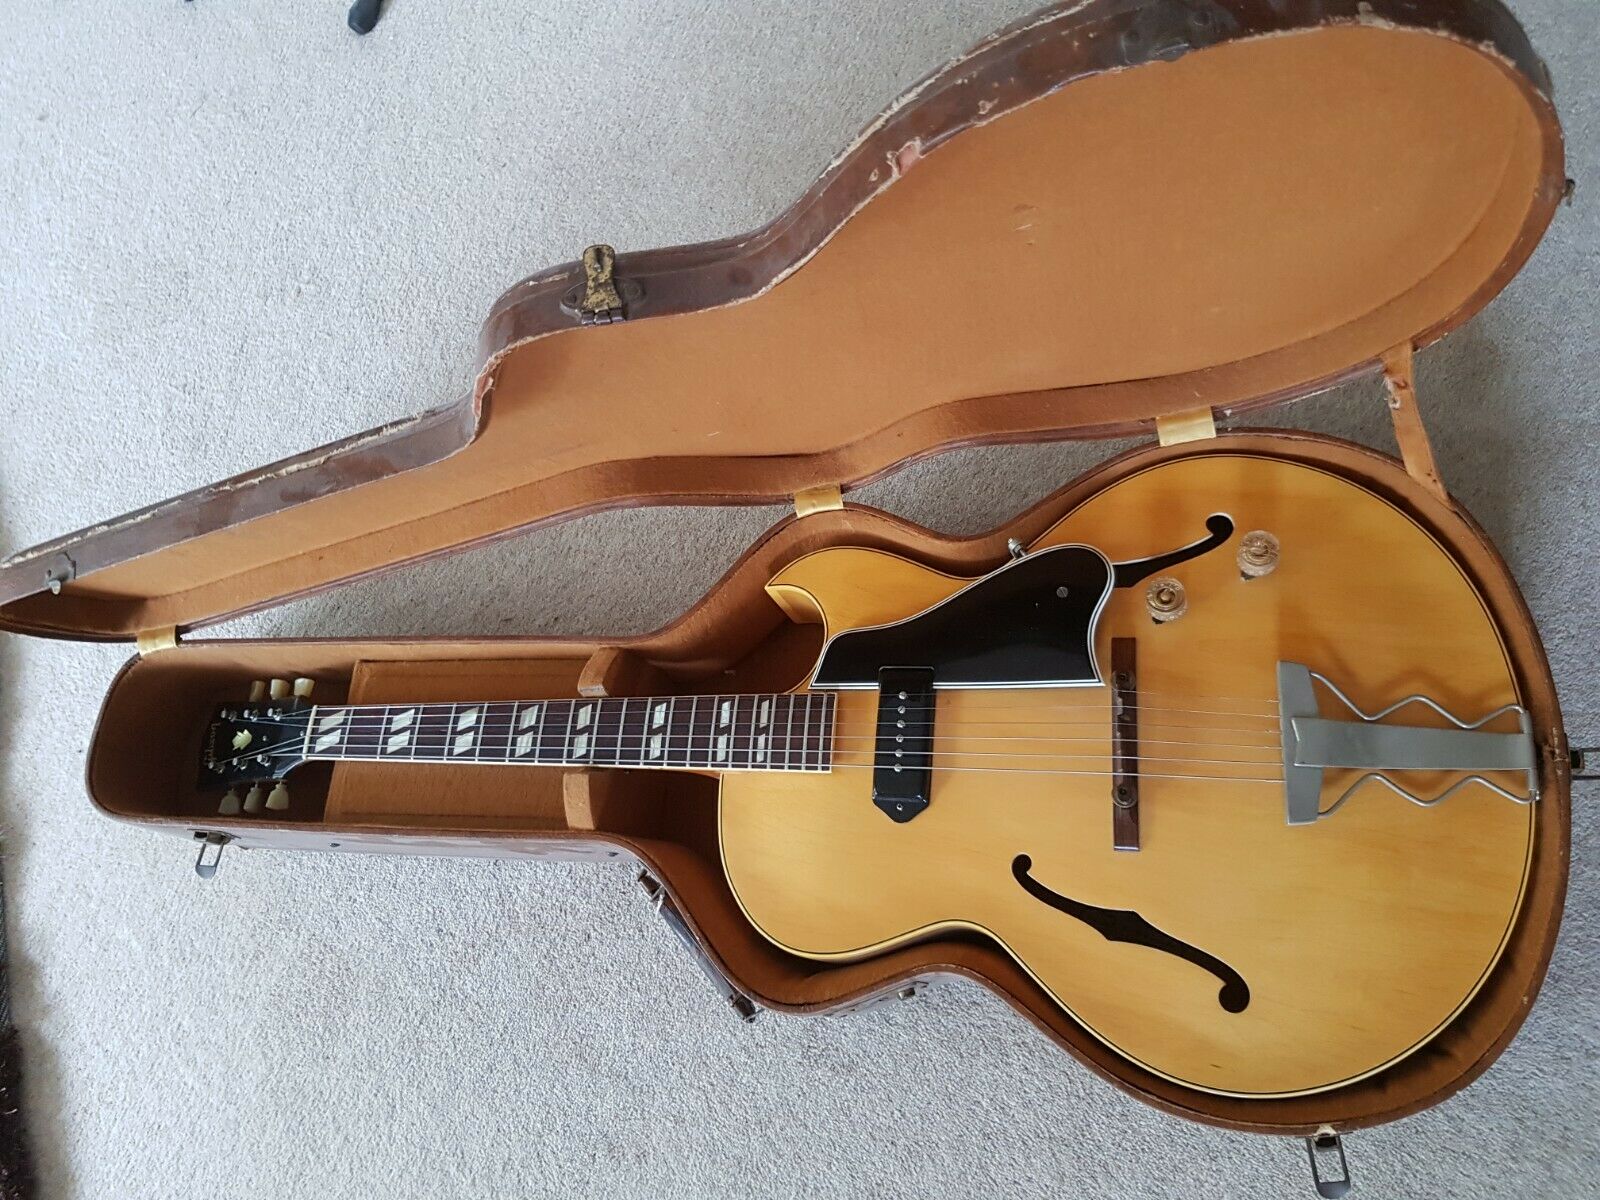 Thoughts On This Near Immaculate 1951 Gibson ES-175-s-l1600-8-jpg